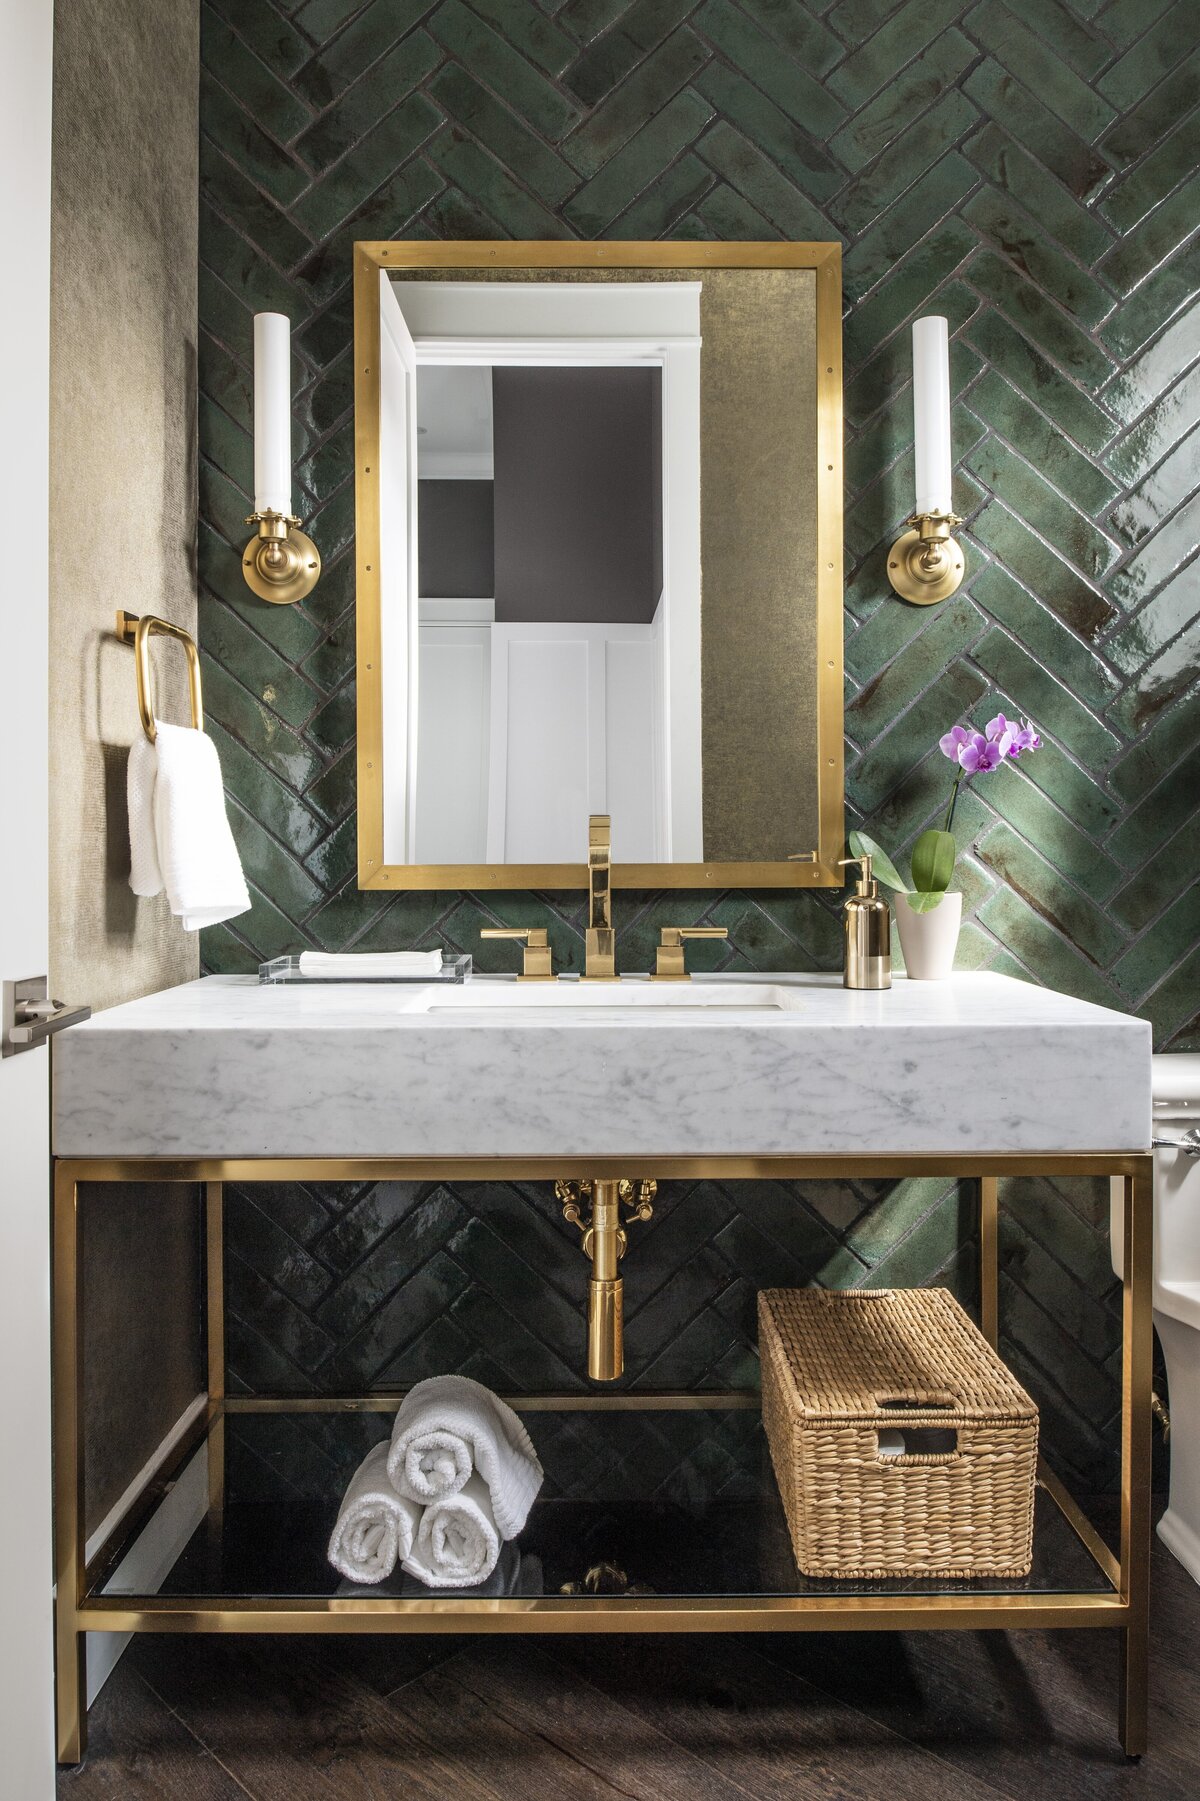 Appealing Gold Bath Sink Area with appealing gold borders Design